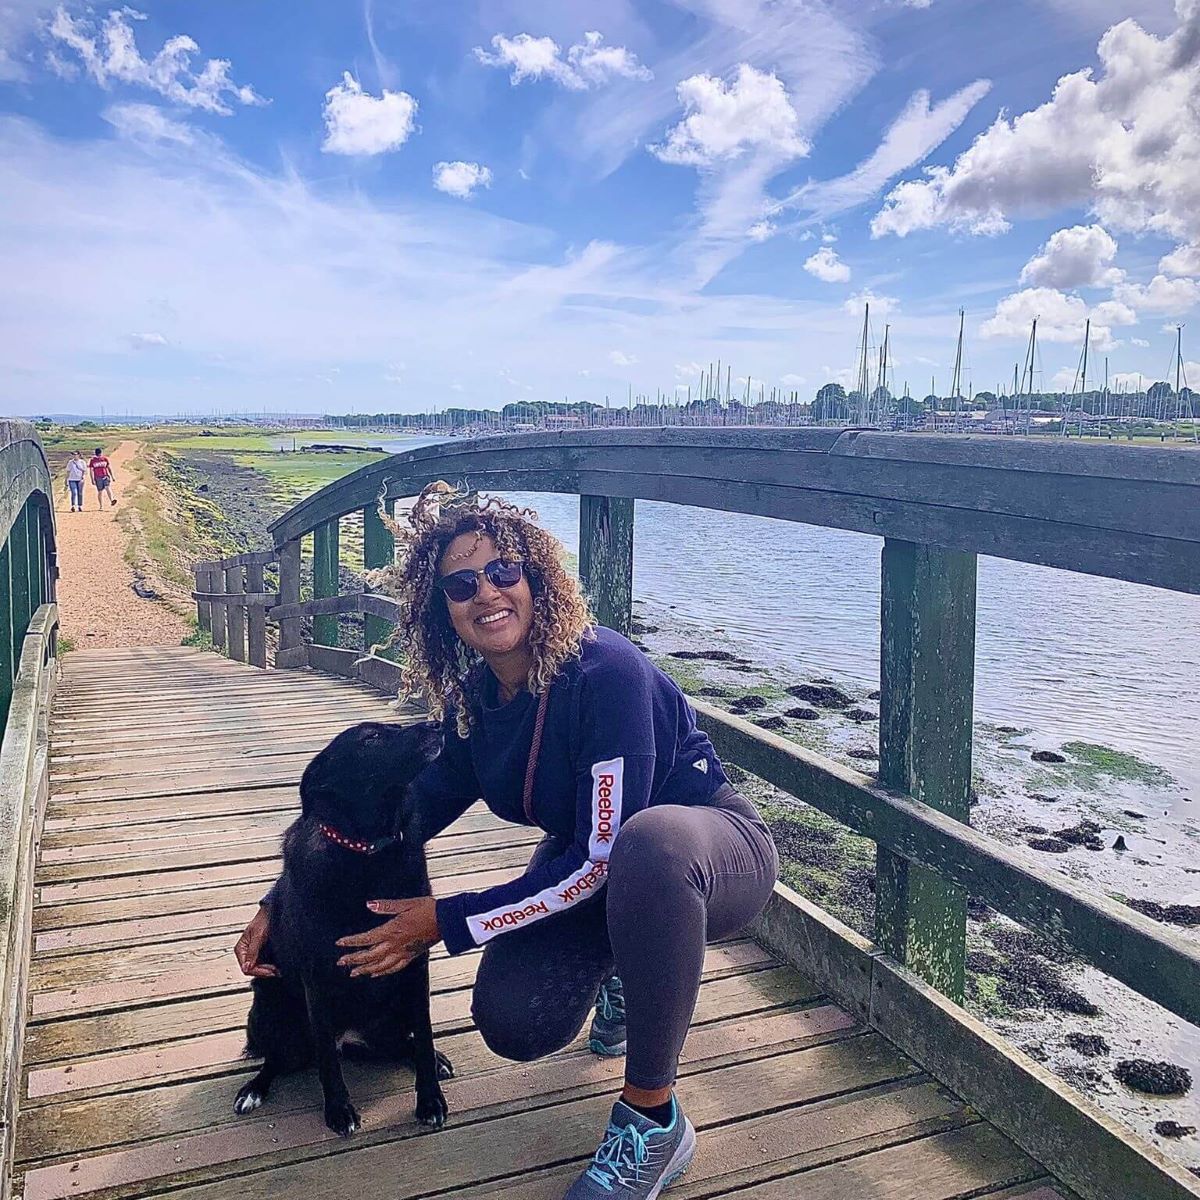 Jessie Stacey, owner of The Animal Days, sits with a dog on a boardwalk next to a river